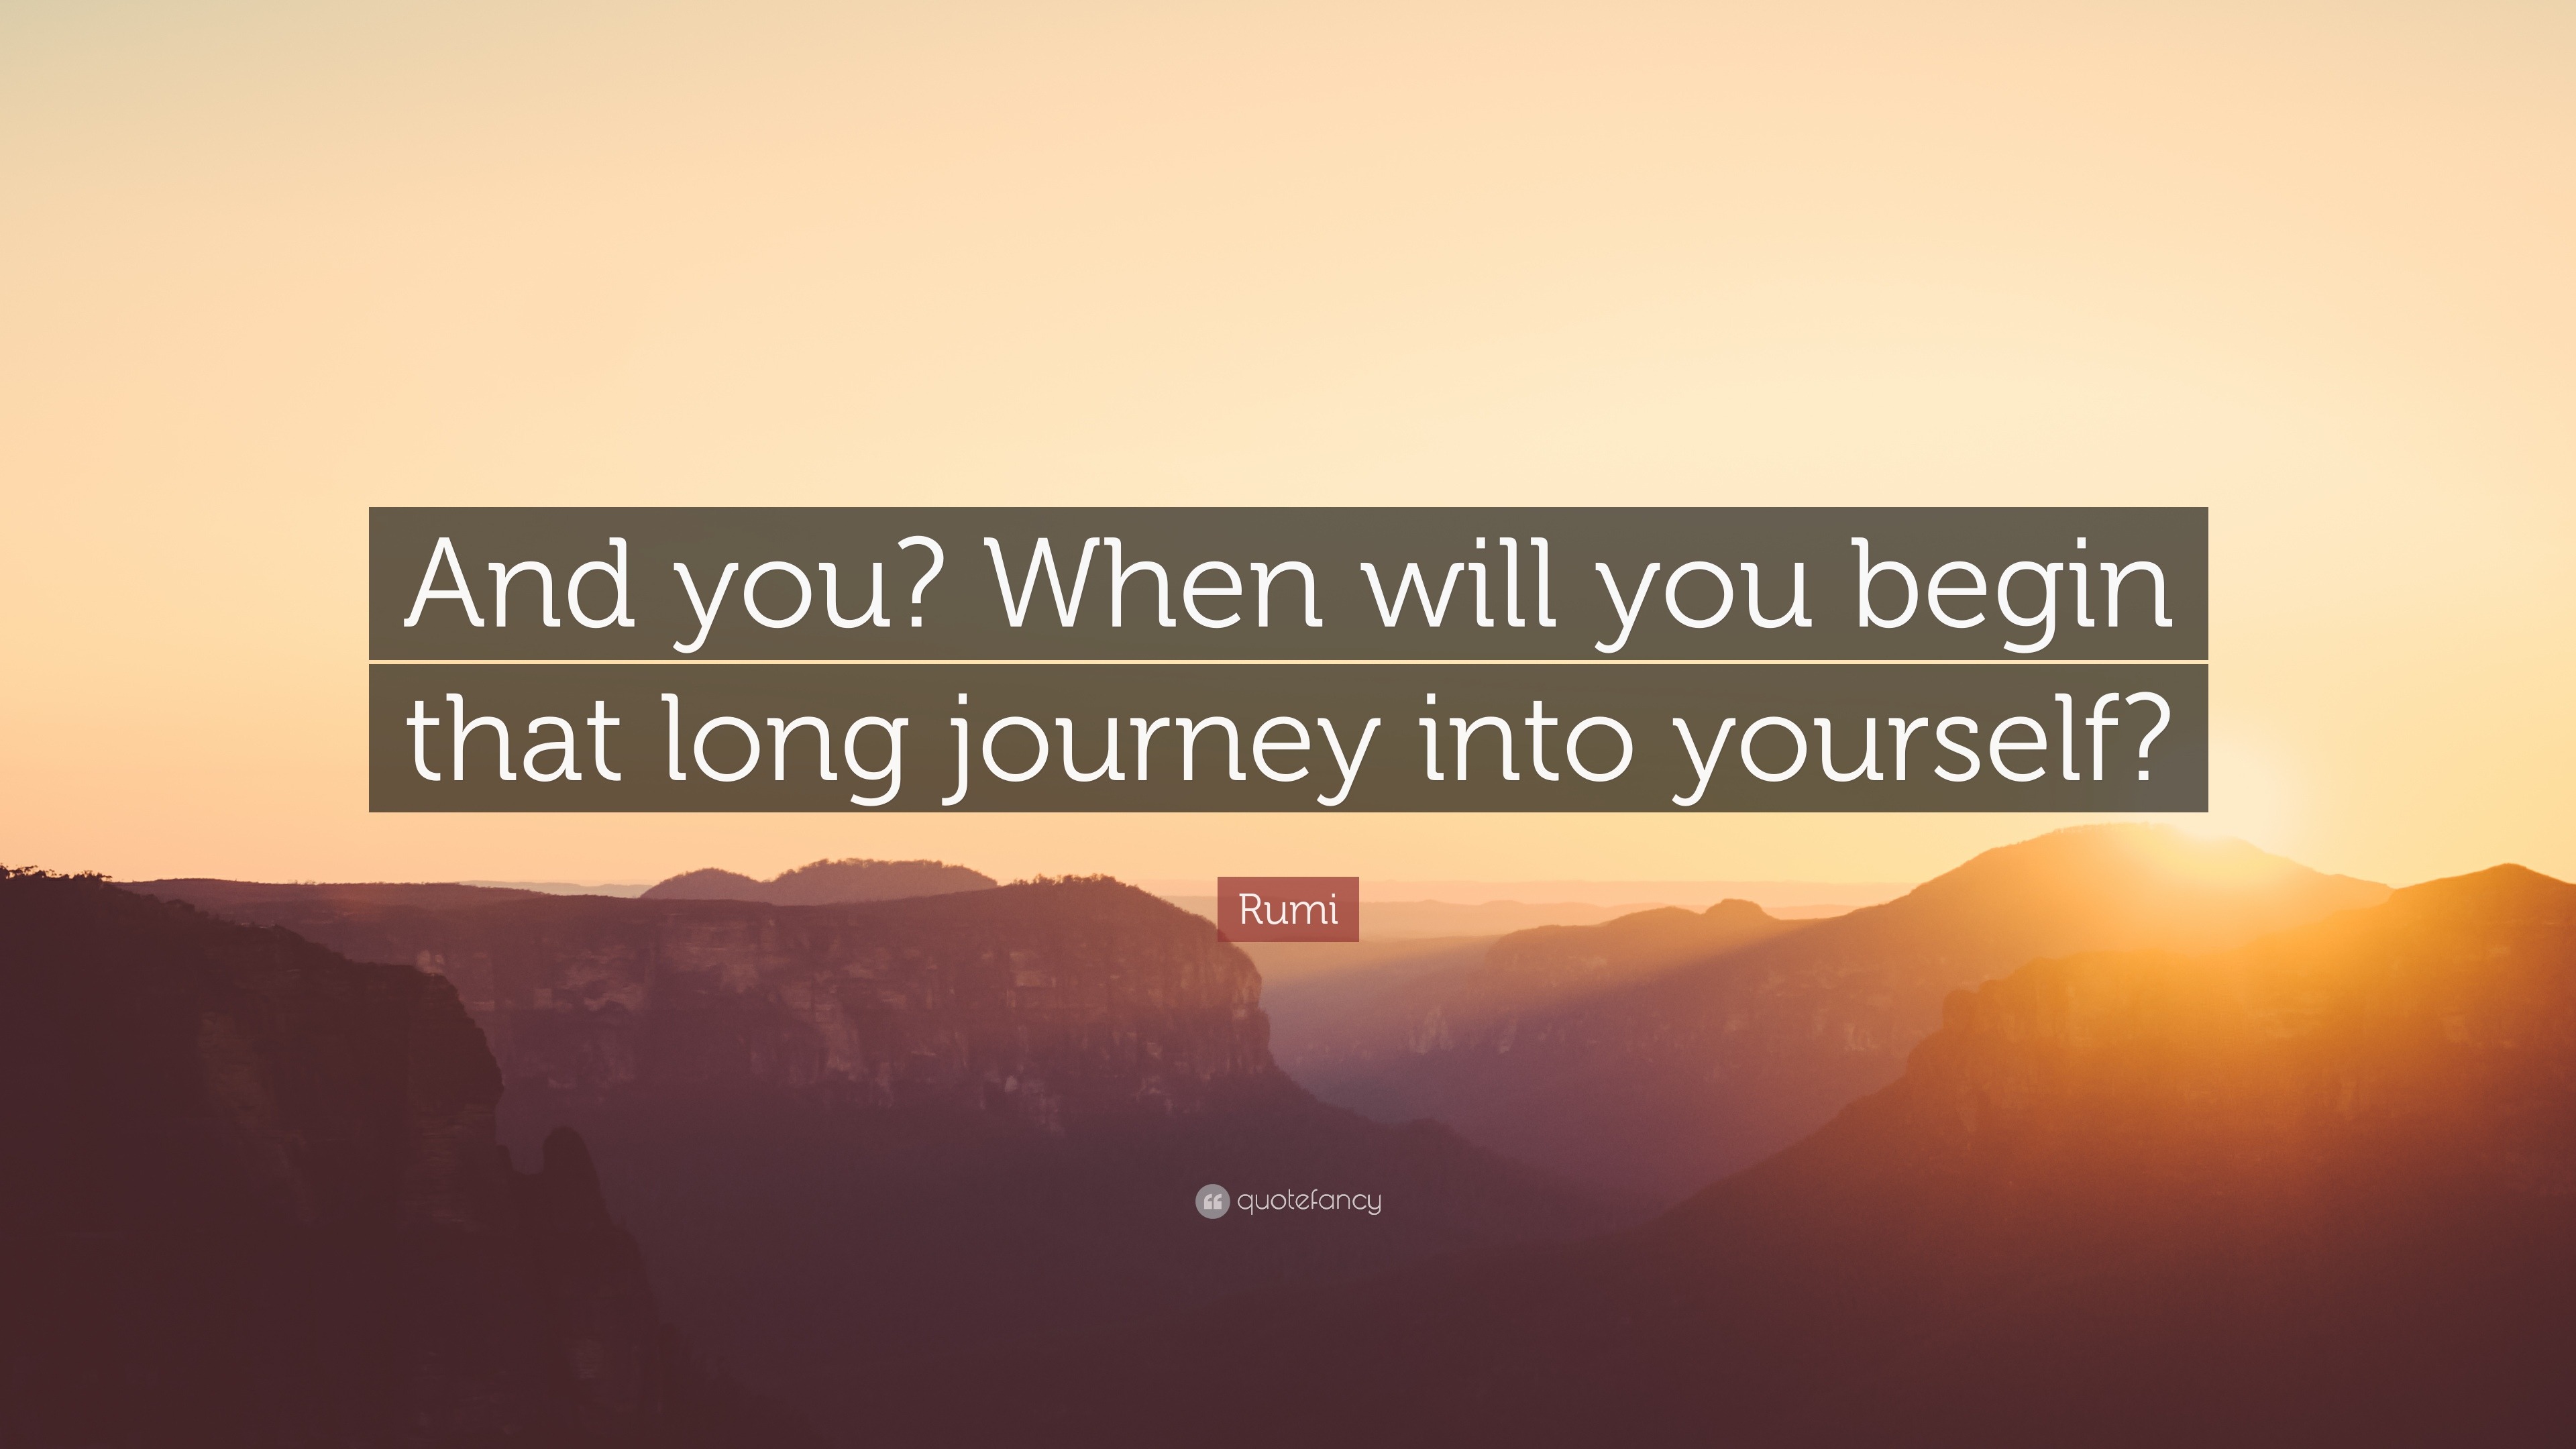 Rumi Quote: “And you? When will you begin that long journey into yourself?”